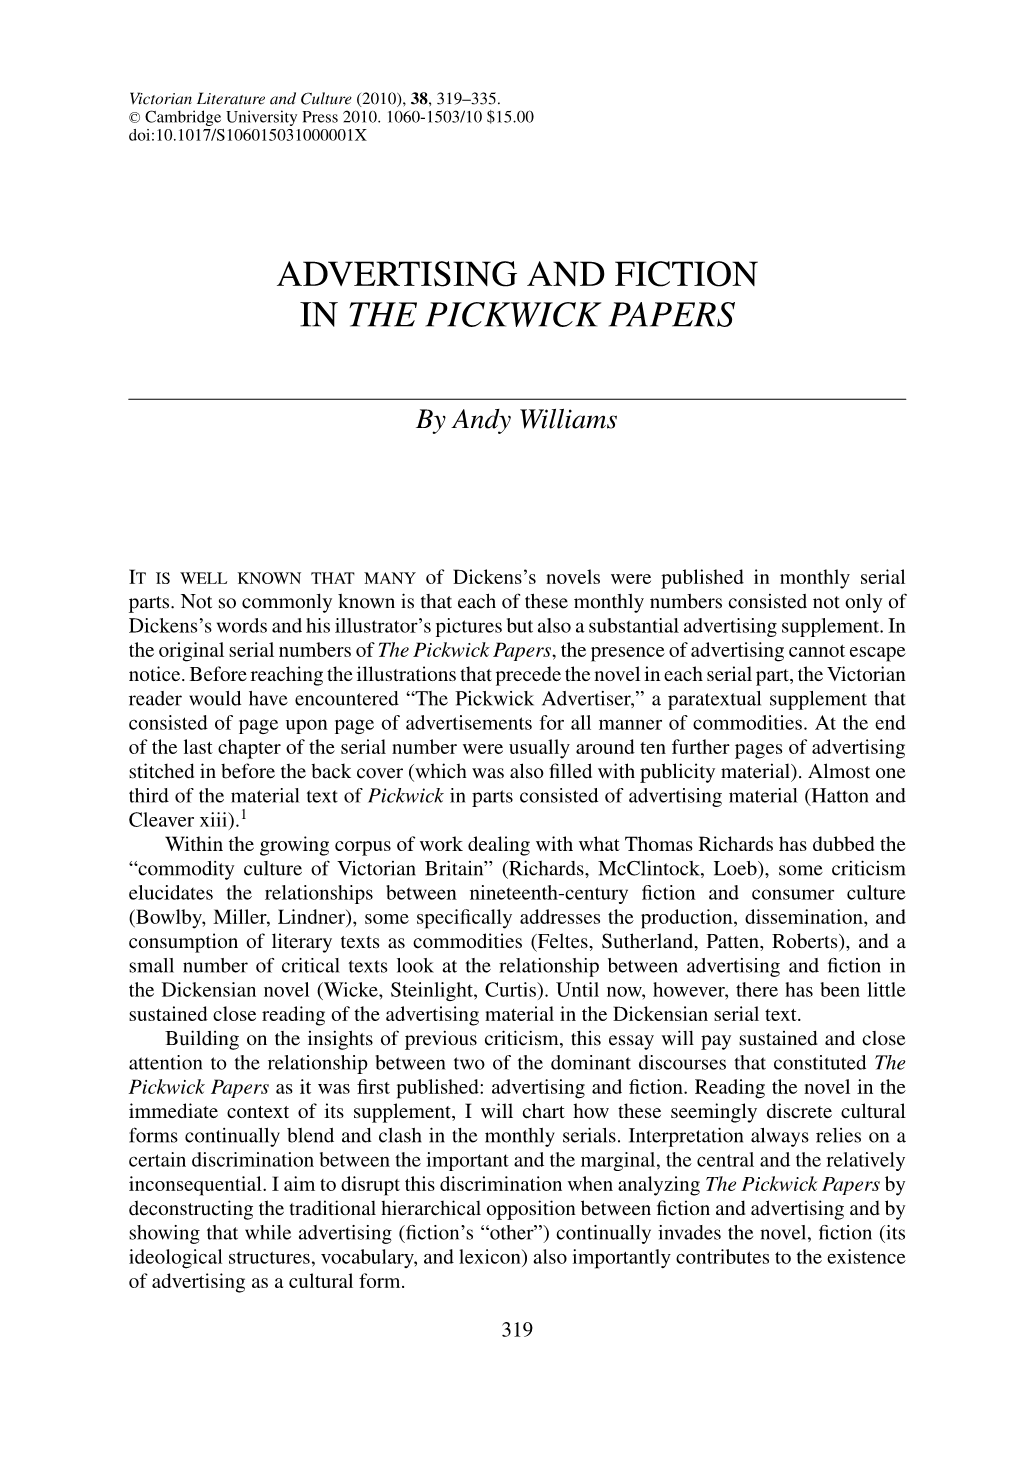 Advertising and Fiction in the Pickwick Papers